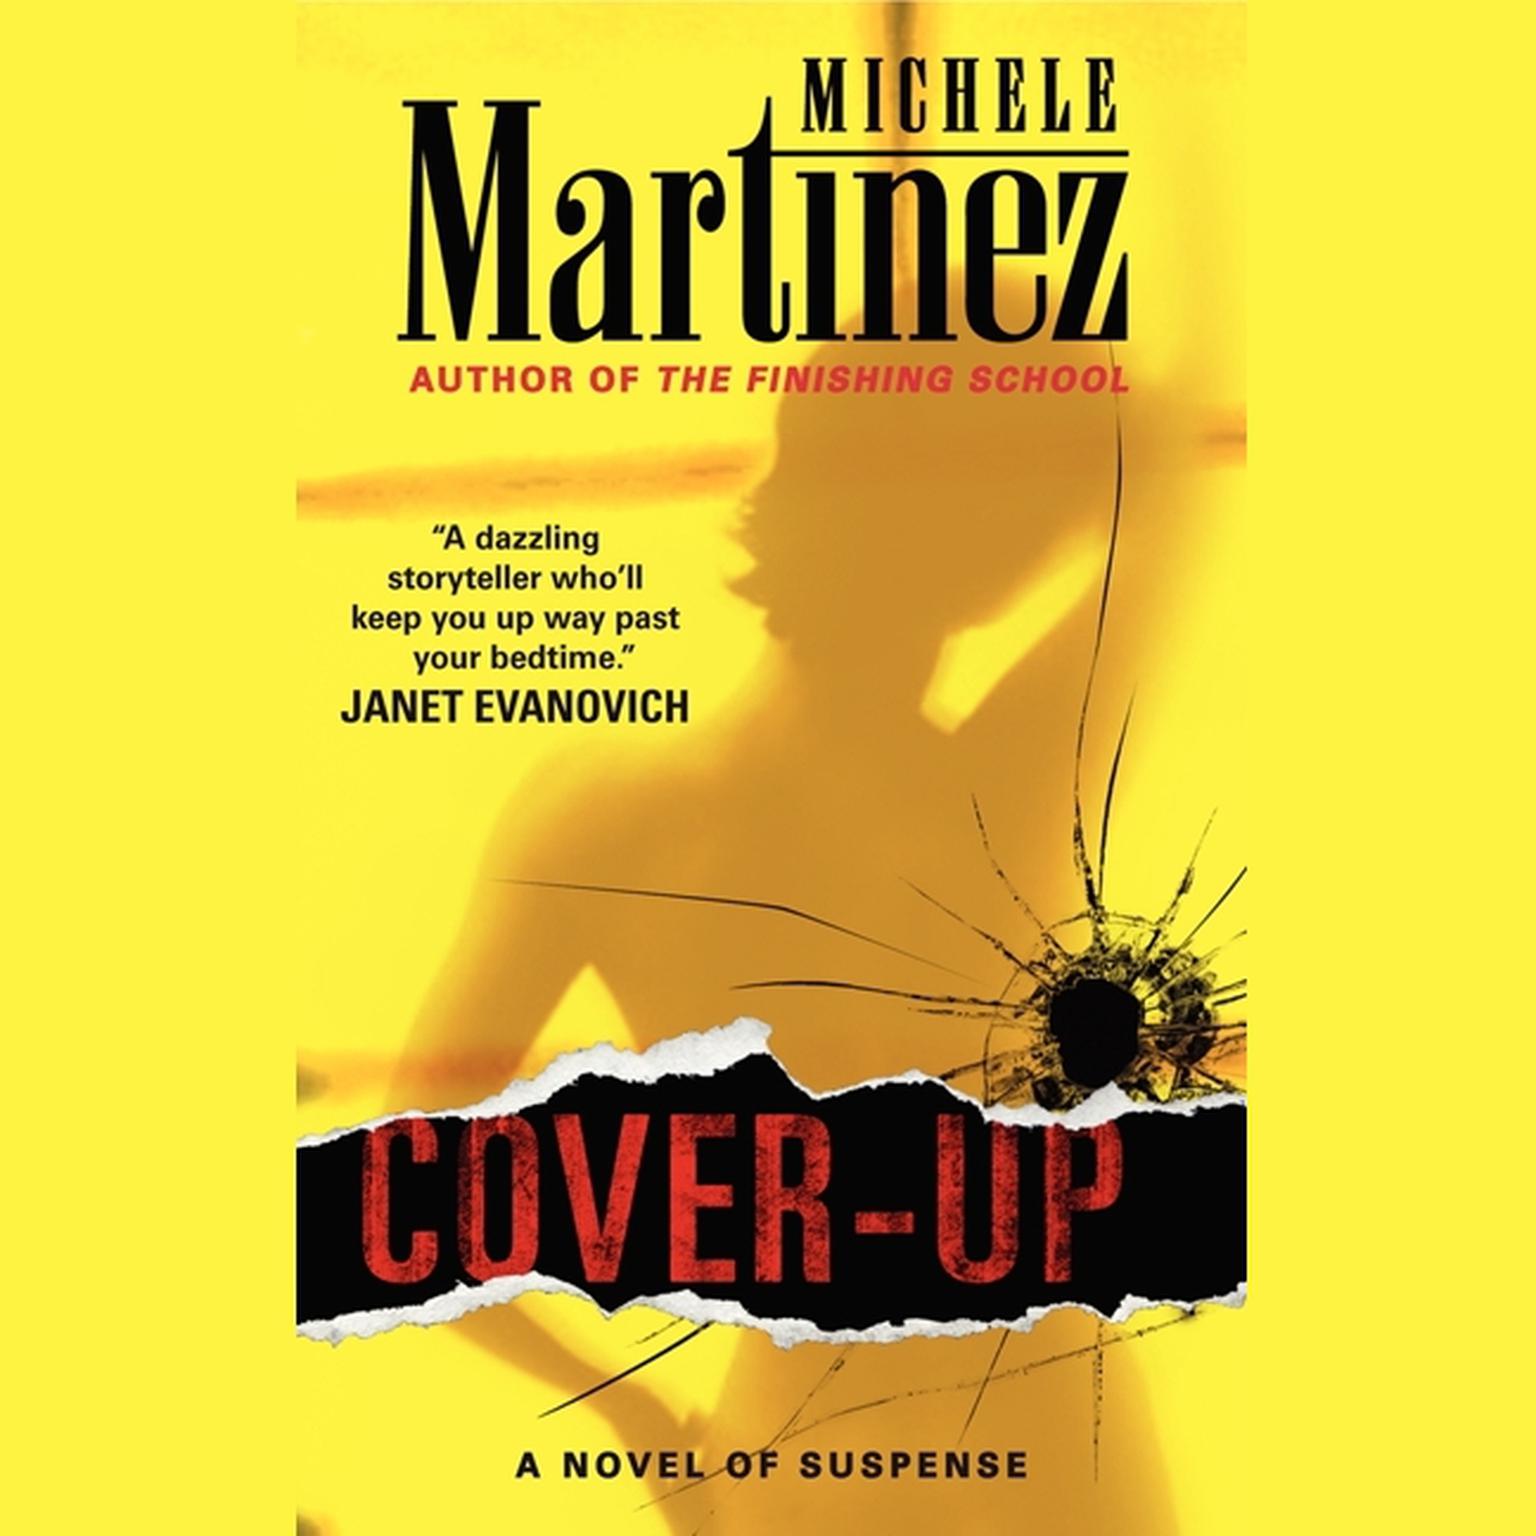 Cover-up Audiobook, by Michele Martinez